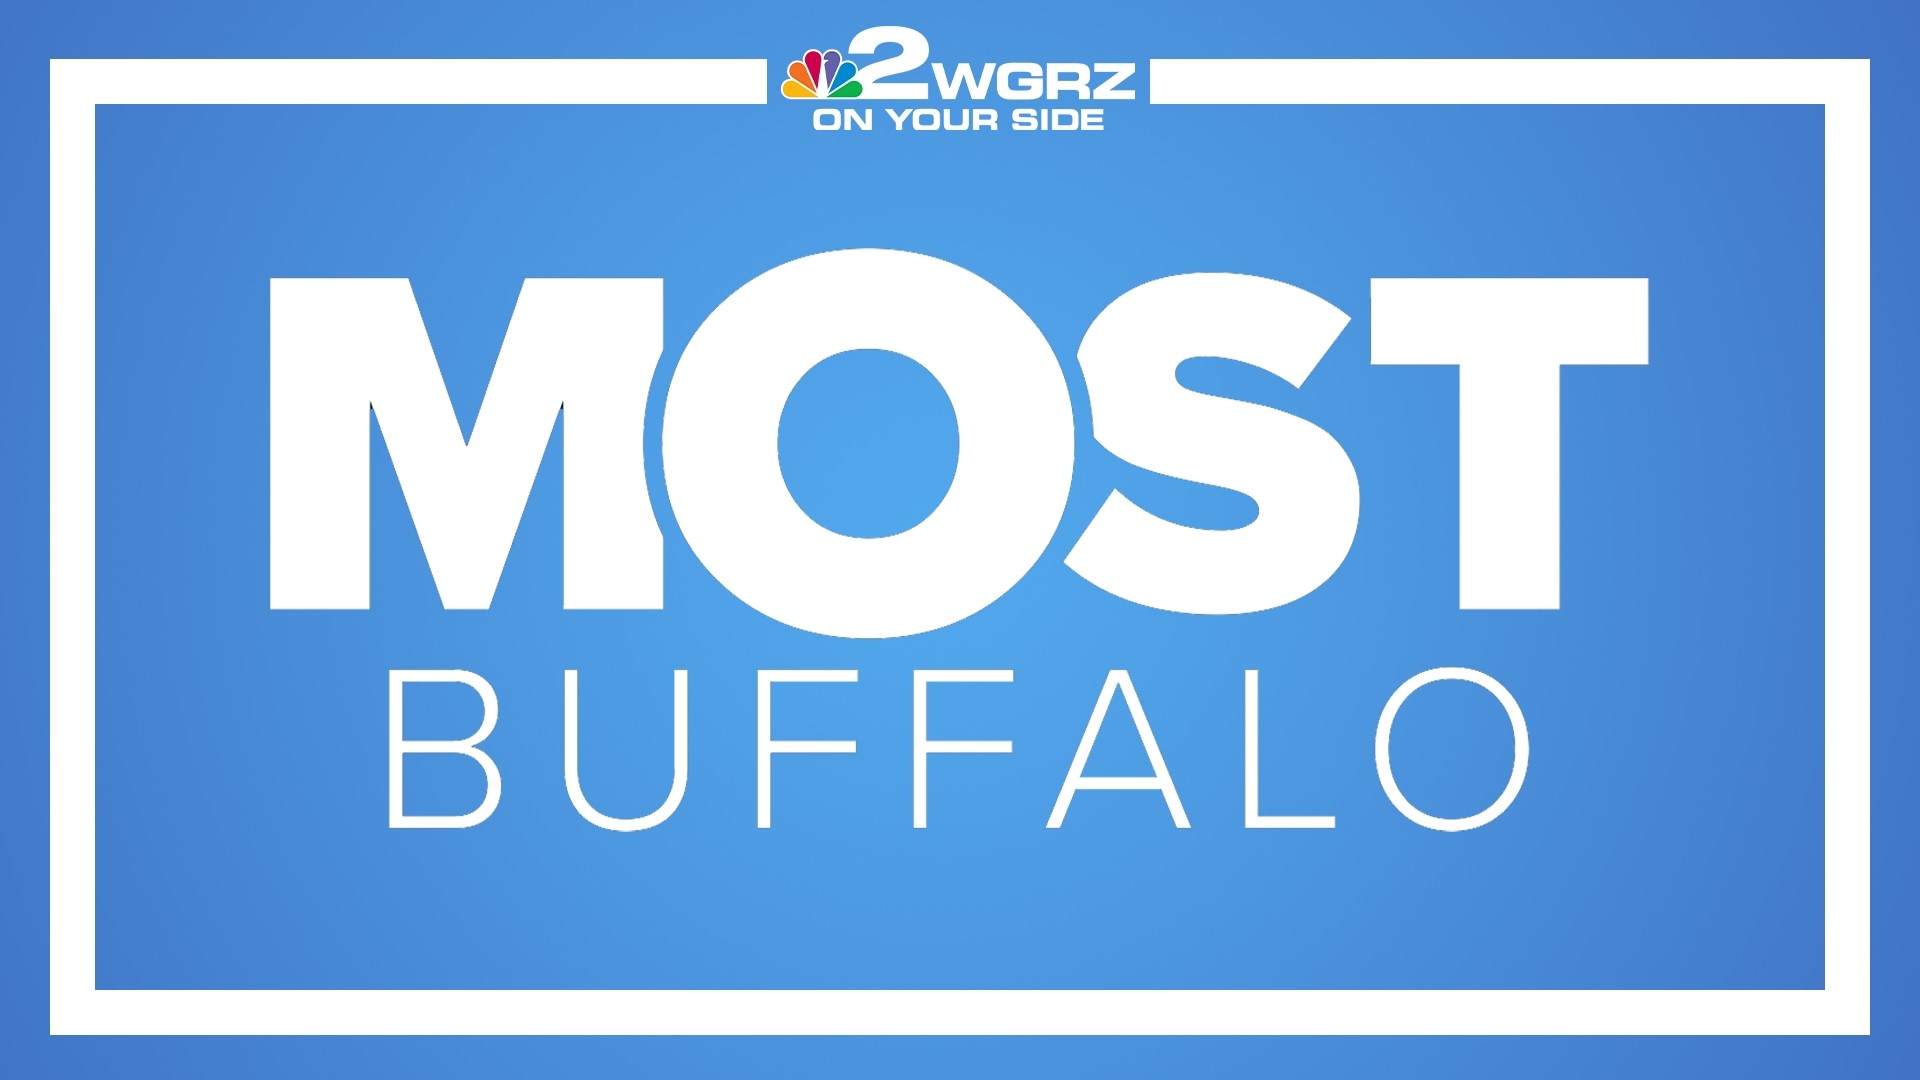 The most news. The most fun. Most Buffalo.